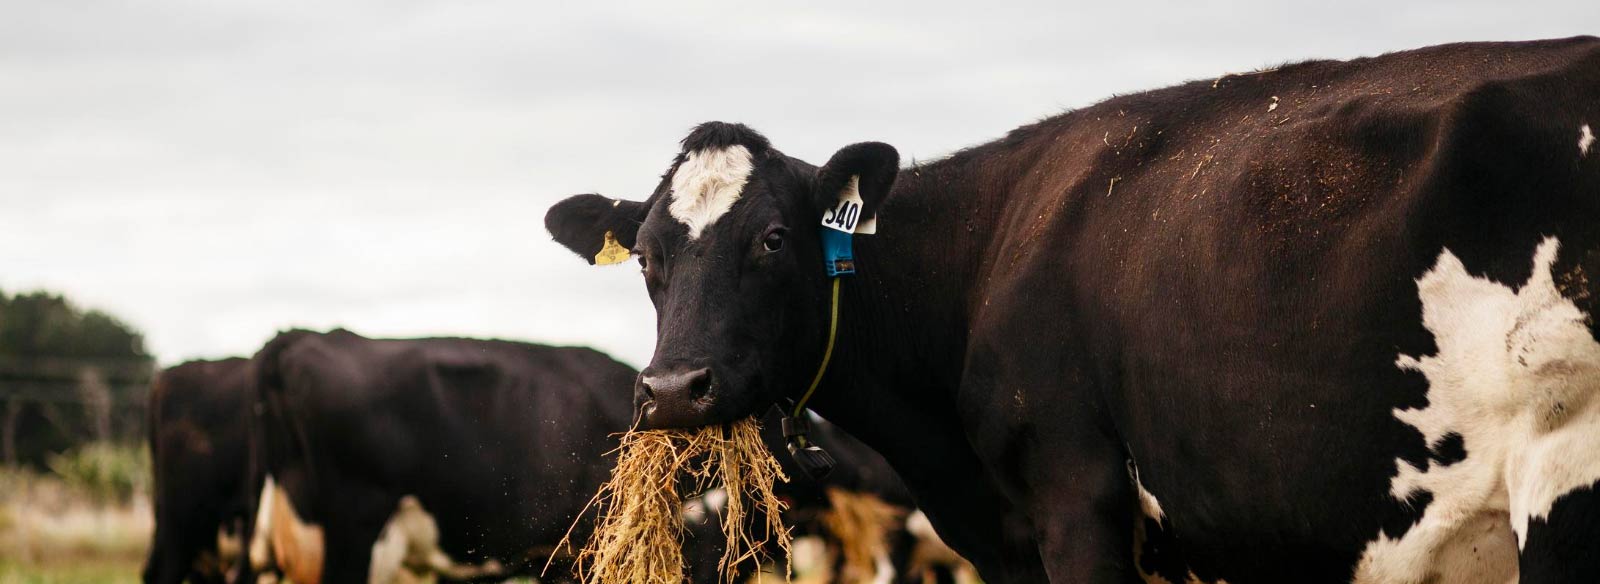 Dairy Cow eating hay with Allflex Tags and Collar